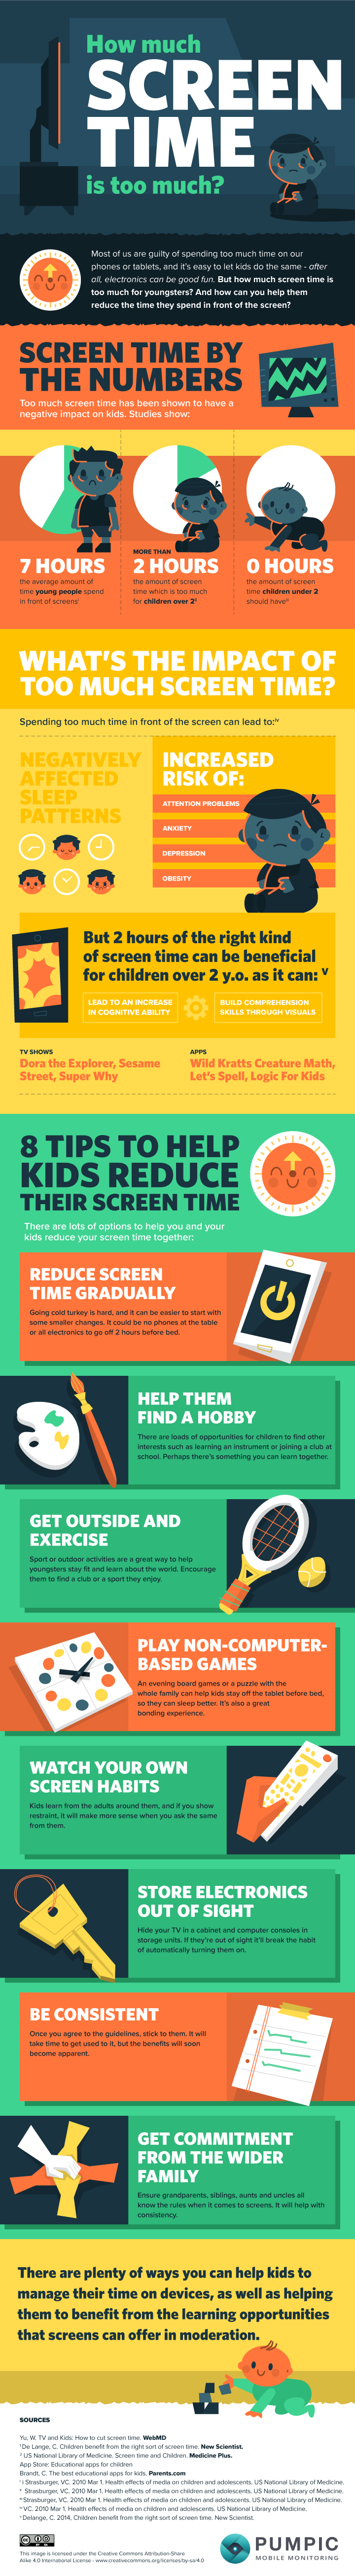 8 Must-Follow Tips to Manage Kids’ Screen Time [infographic]